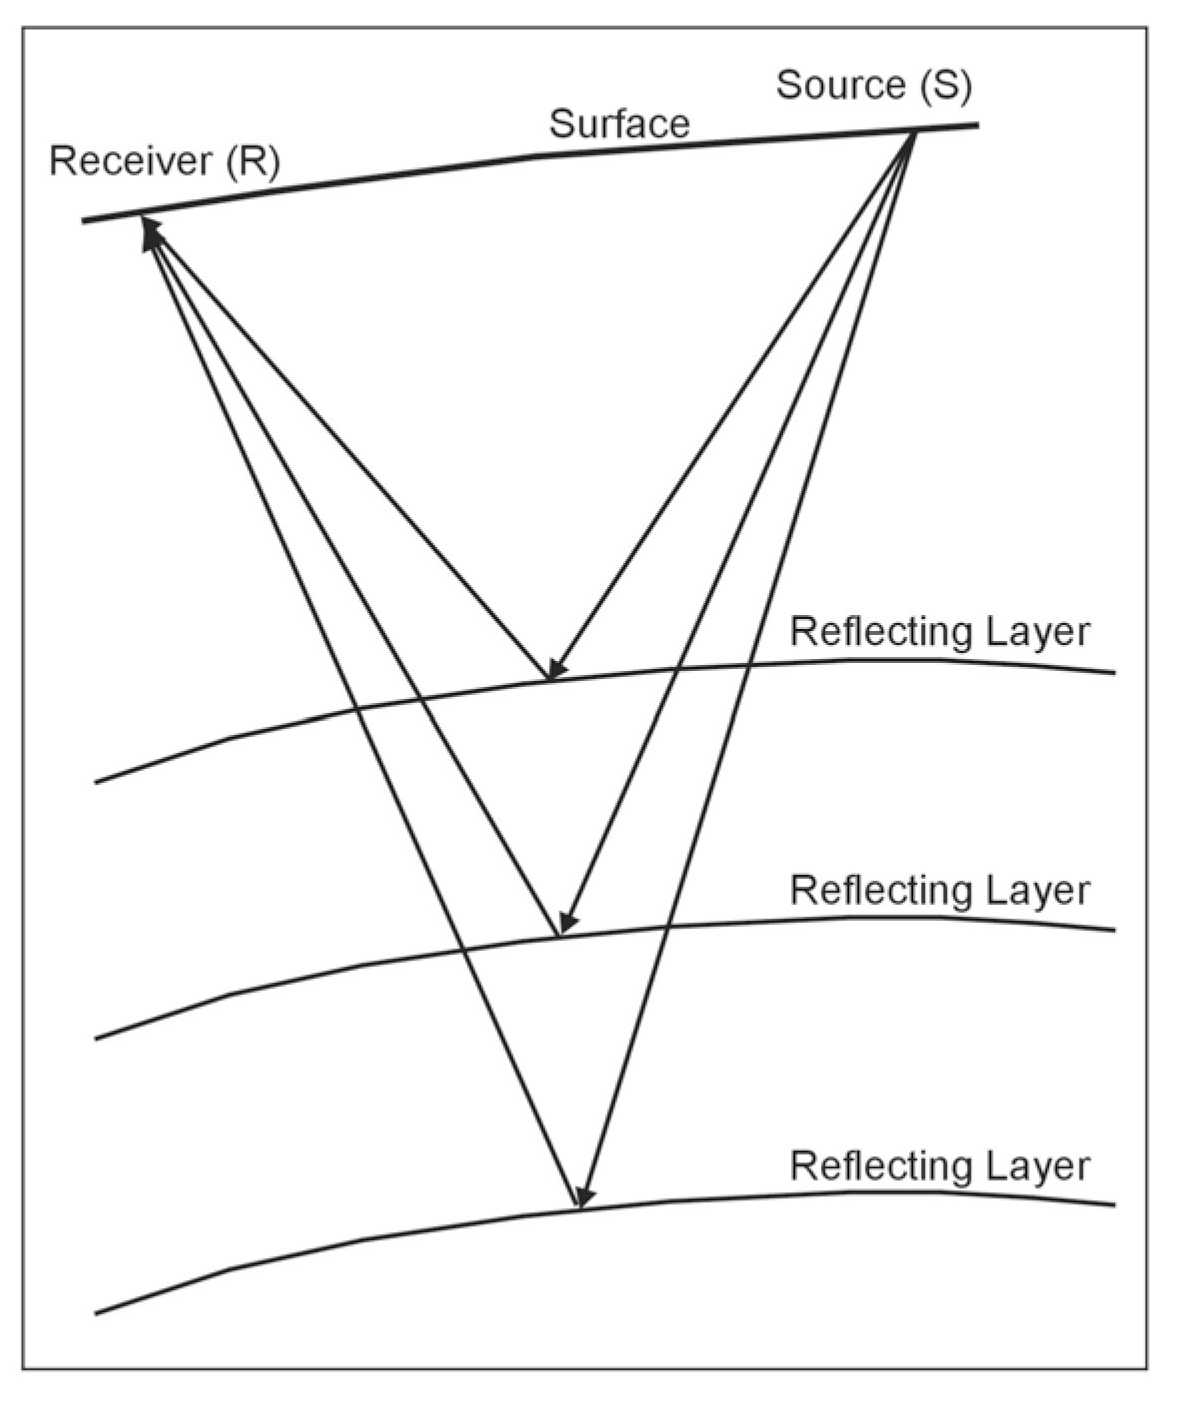 Schematic of the seismic reflection method. 